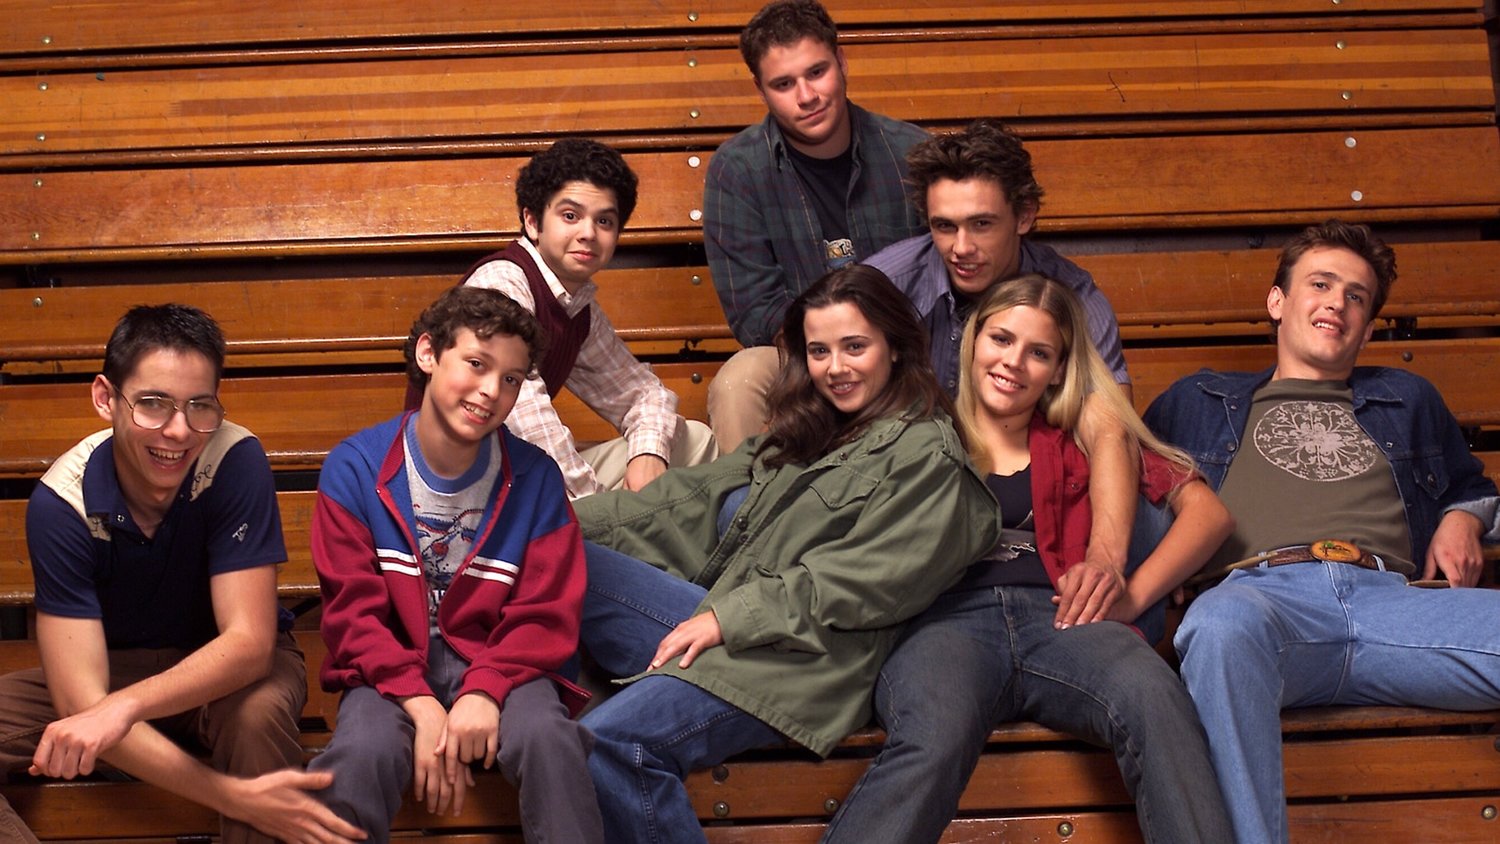 There's a FREAKS AND GEEKS Documentary Coming to A&E in 2018.